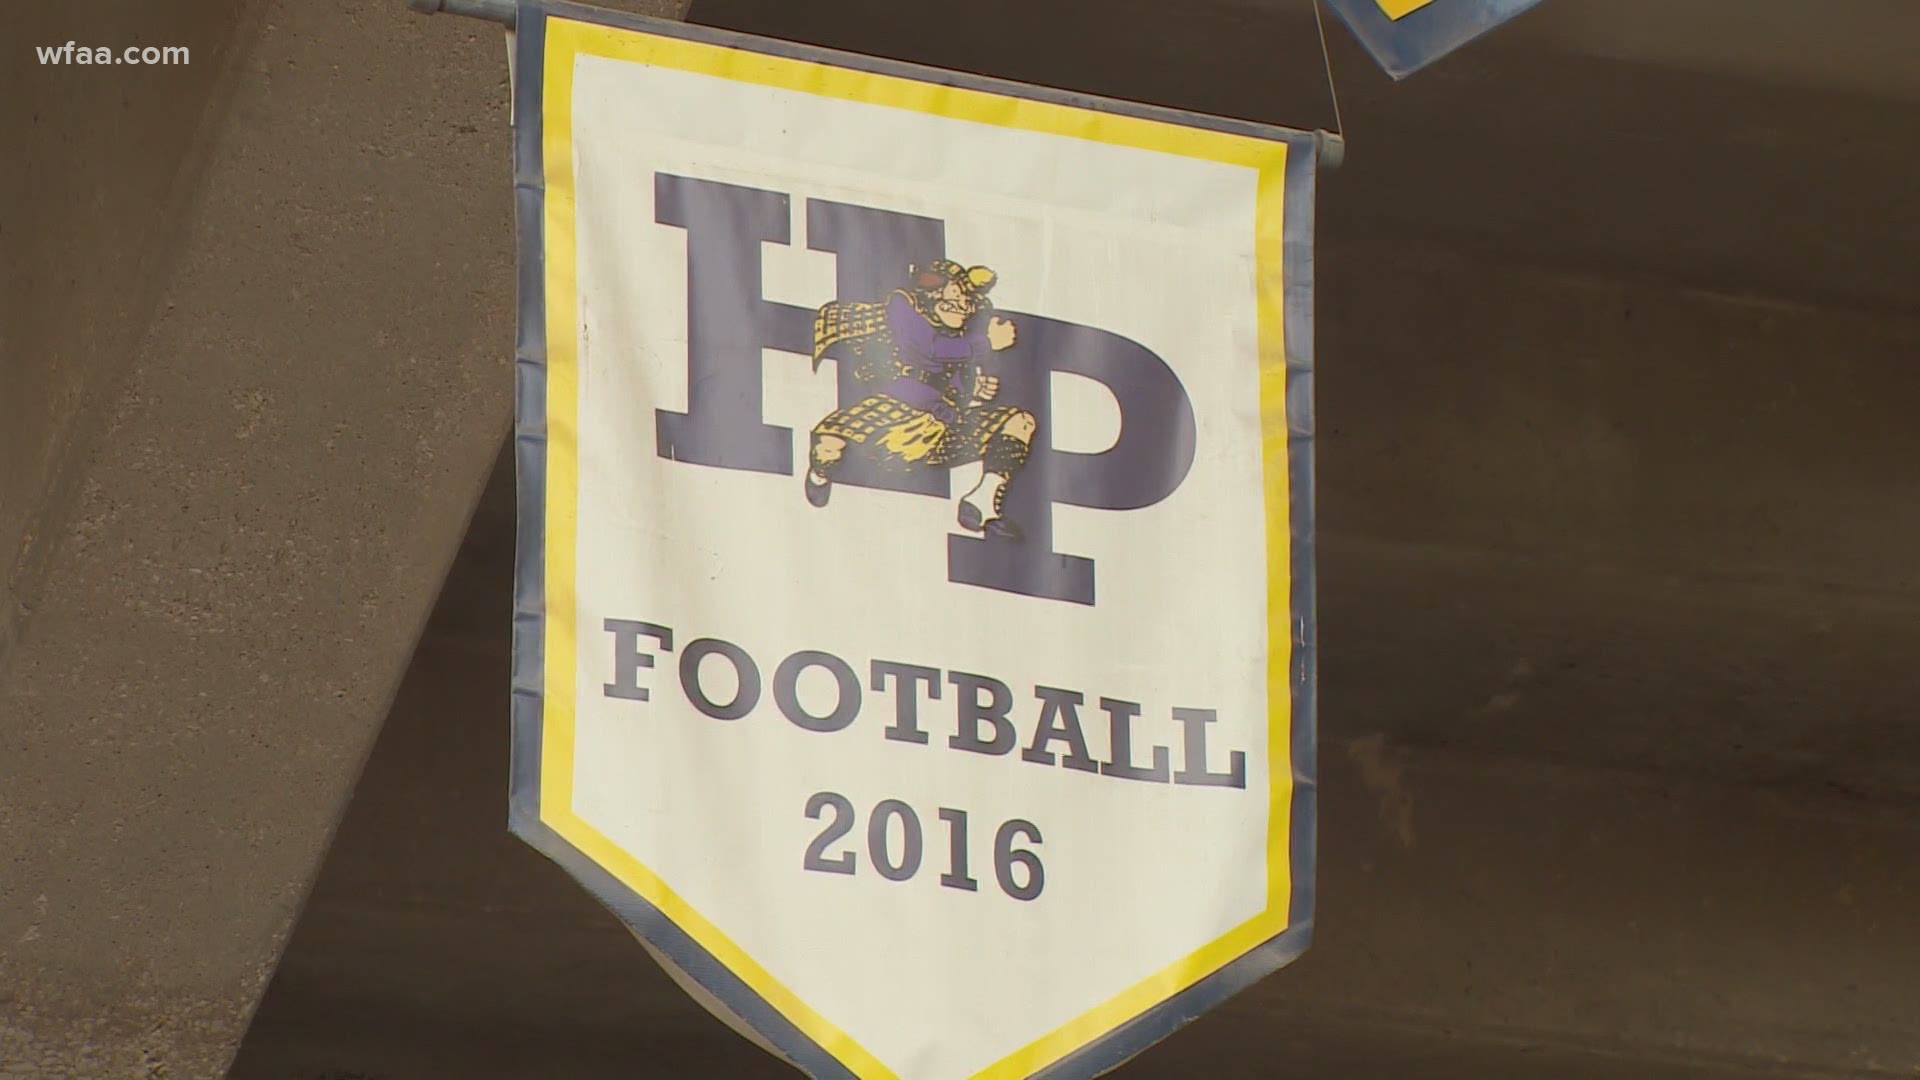 Highland Park had to cancel a planned football scrimmage after a number of players tested positive. Rangers broadcaster C.J. Nitkowski also tested positive.